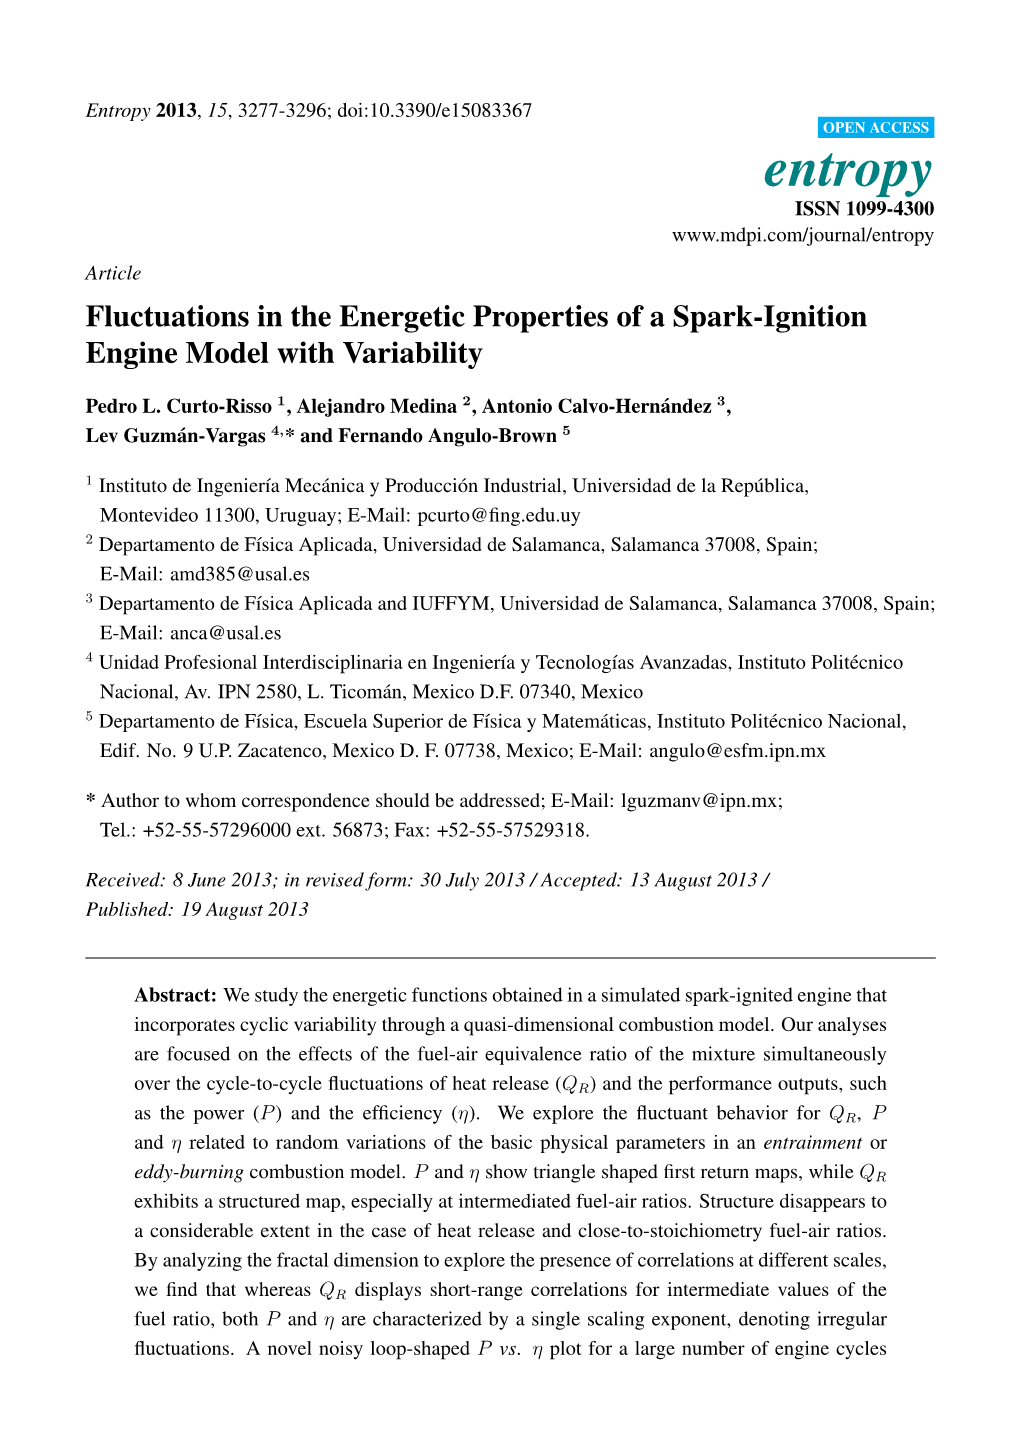 Fluctuations in the Energetic Properties of a Spark-Ignition Engine Model with Variability